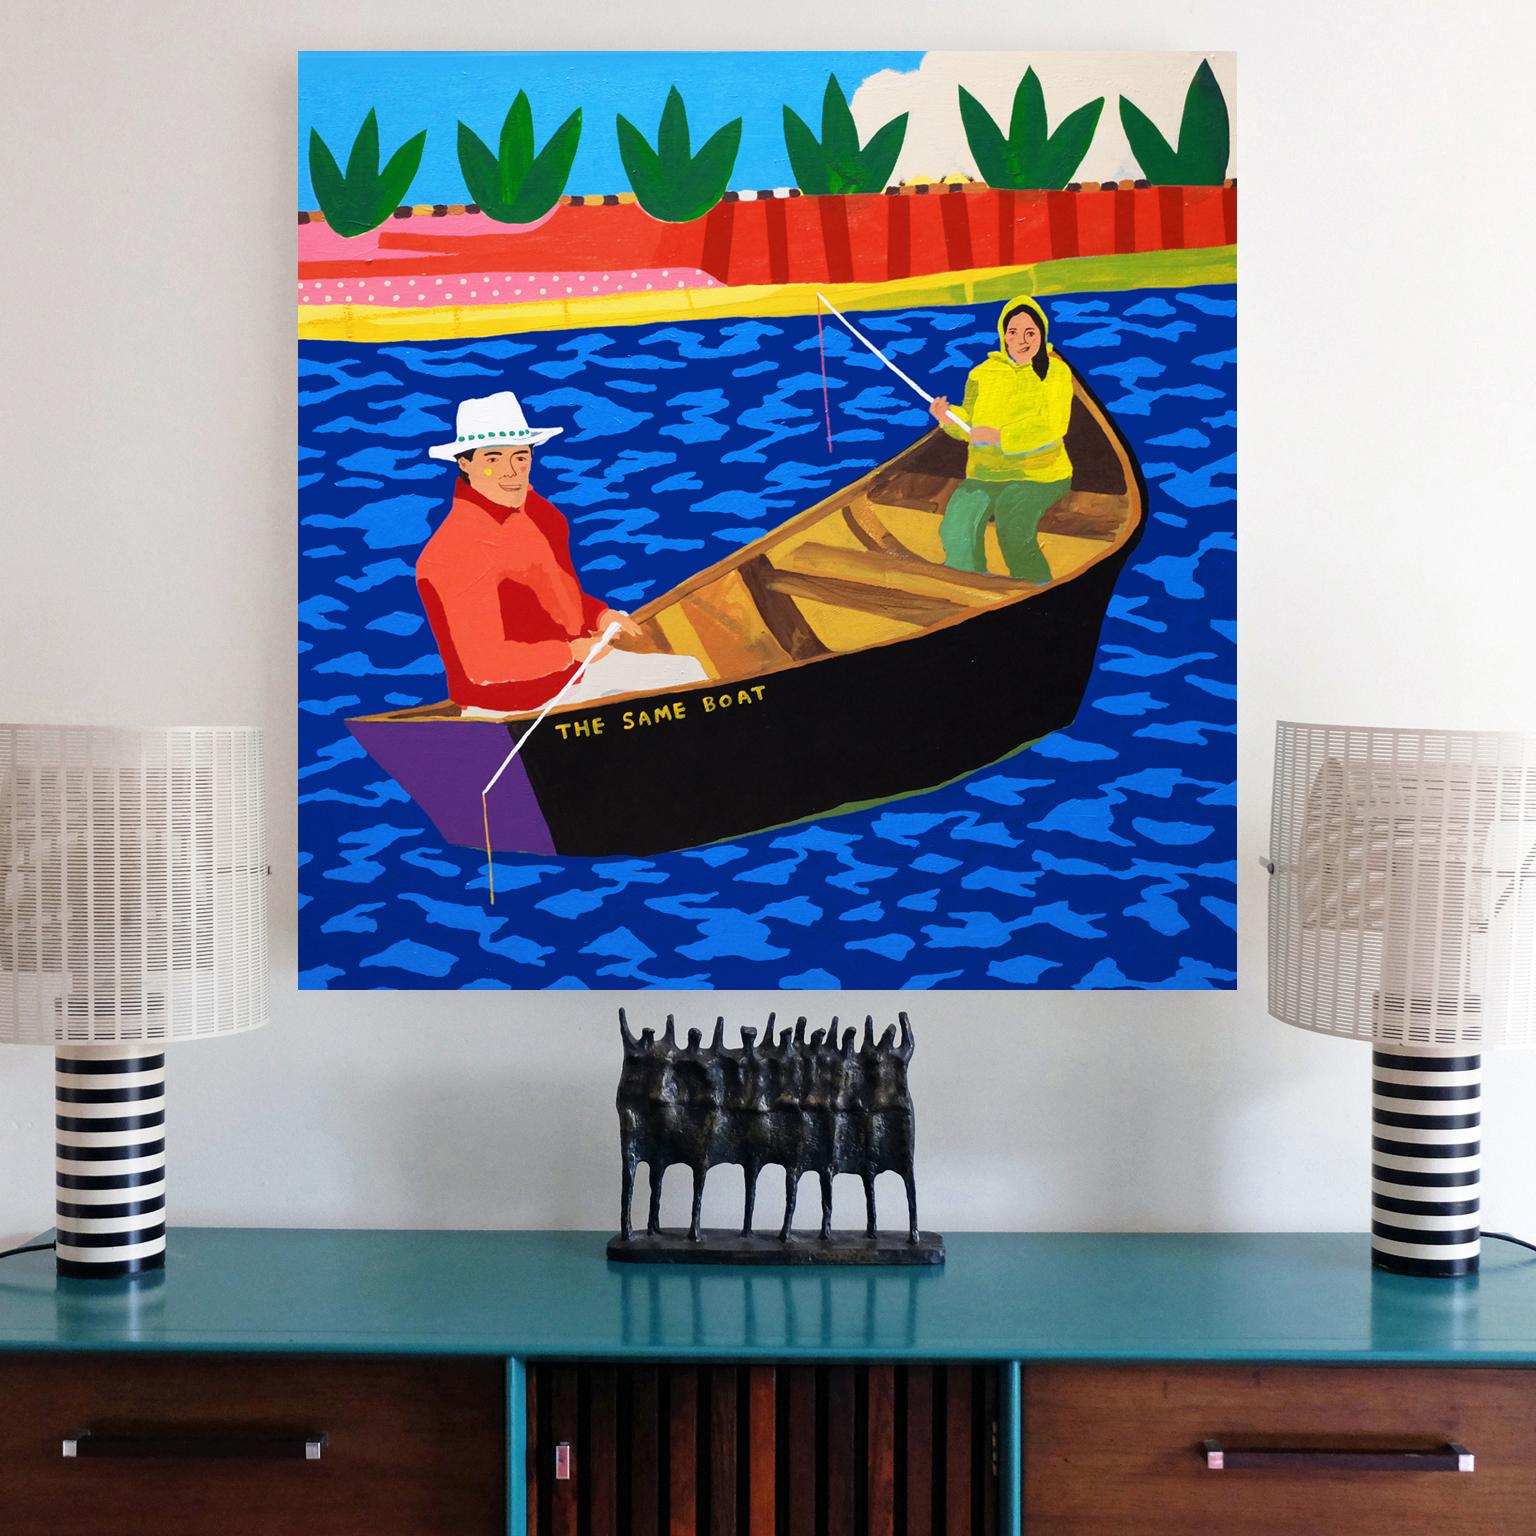 British 'They Were in the Same Boat' Portrait Painting by Alan Fears Pop Art For Sale